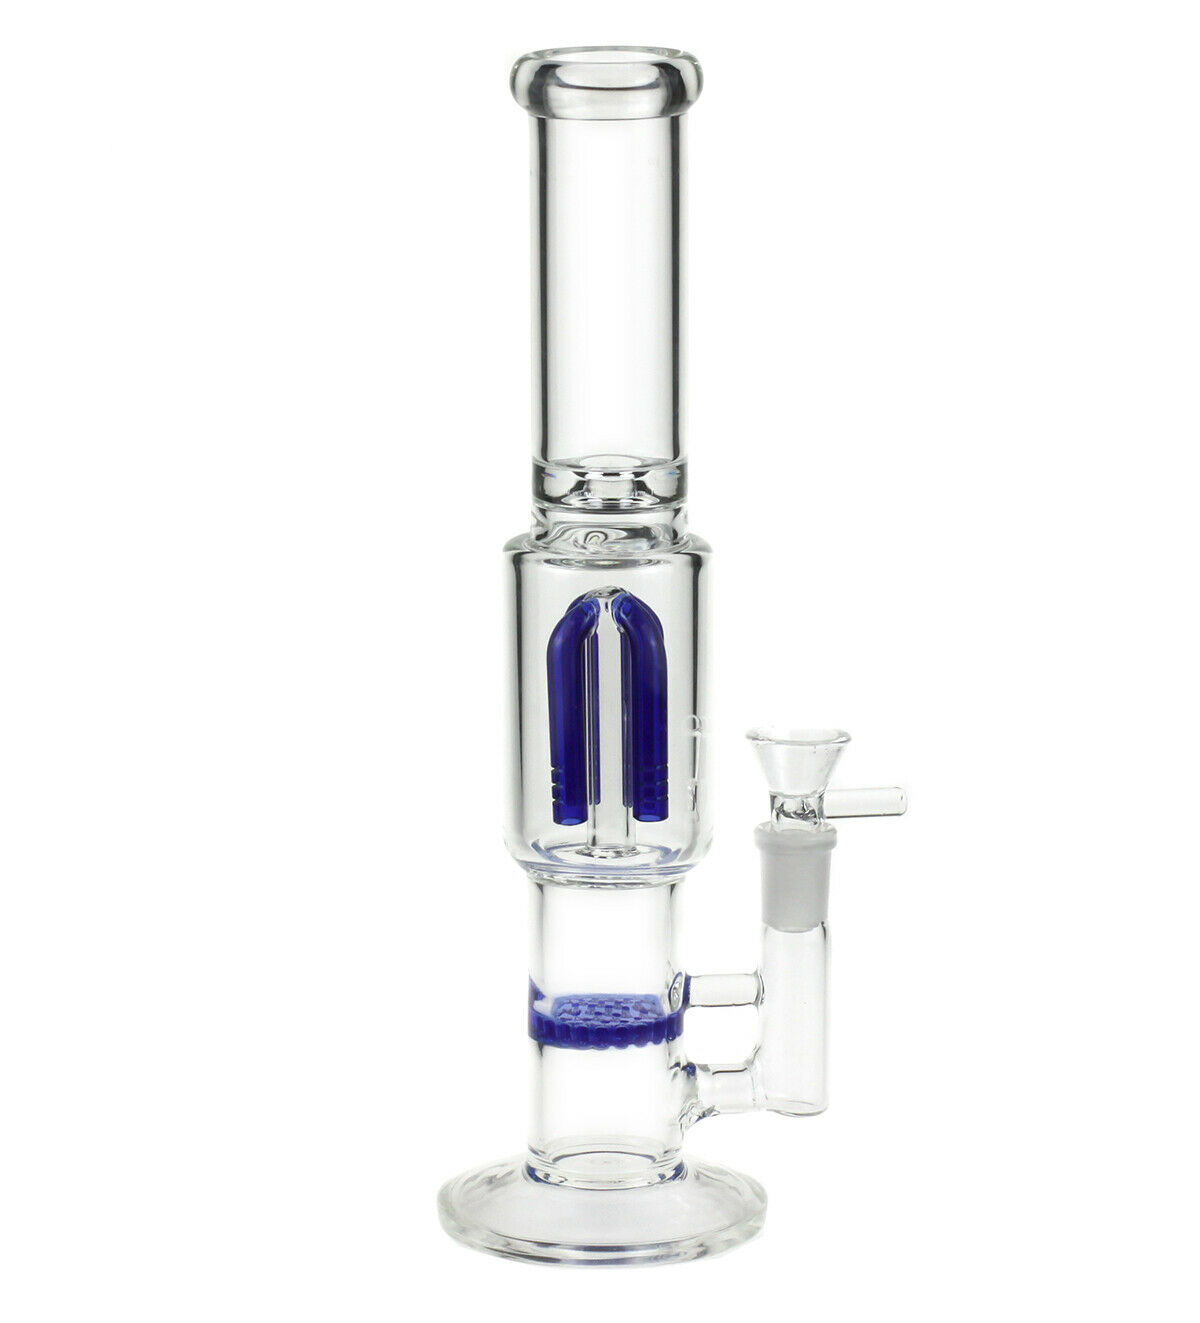 

11 Inch Tall glass bong & Hookahs Oil rig Morty water bongs Pipe with 14mm bowl/ ice catcher classical smoking pipes Hookah